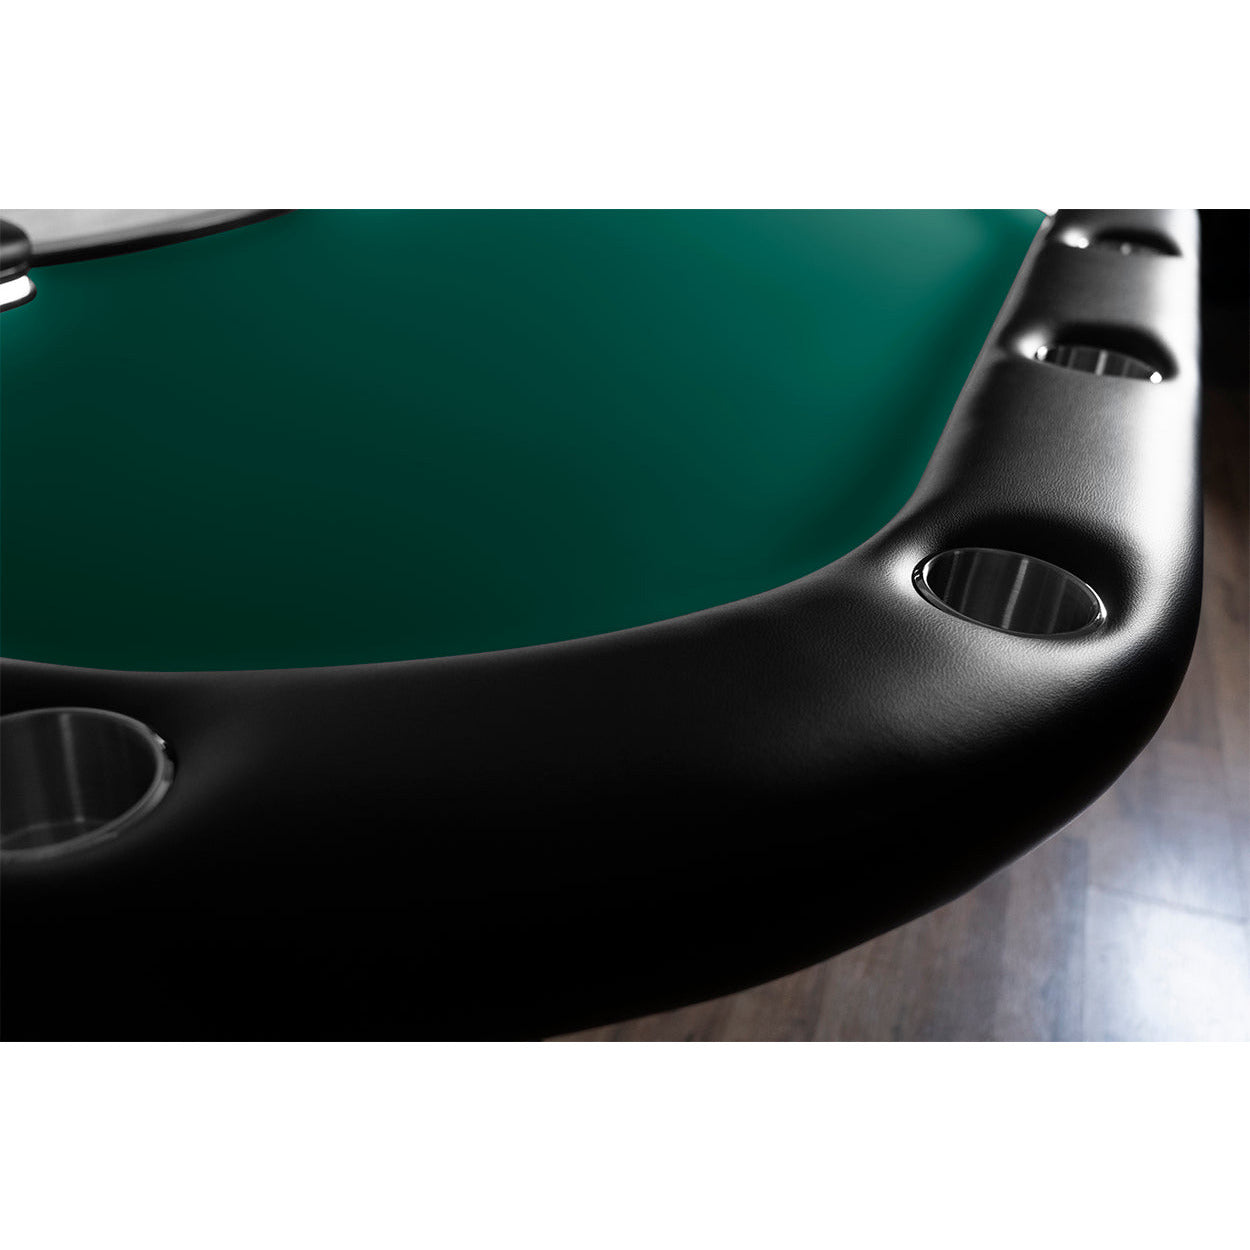 BBO The Aces Pro Alpha Folding Poker Table green close up of corner 